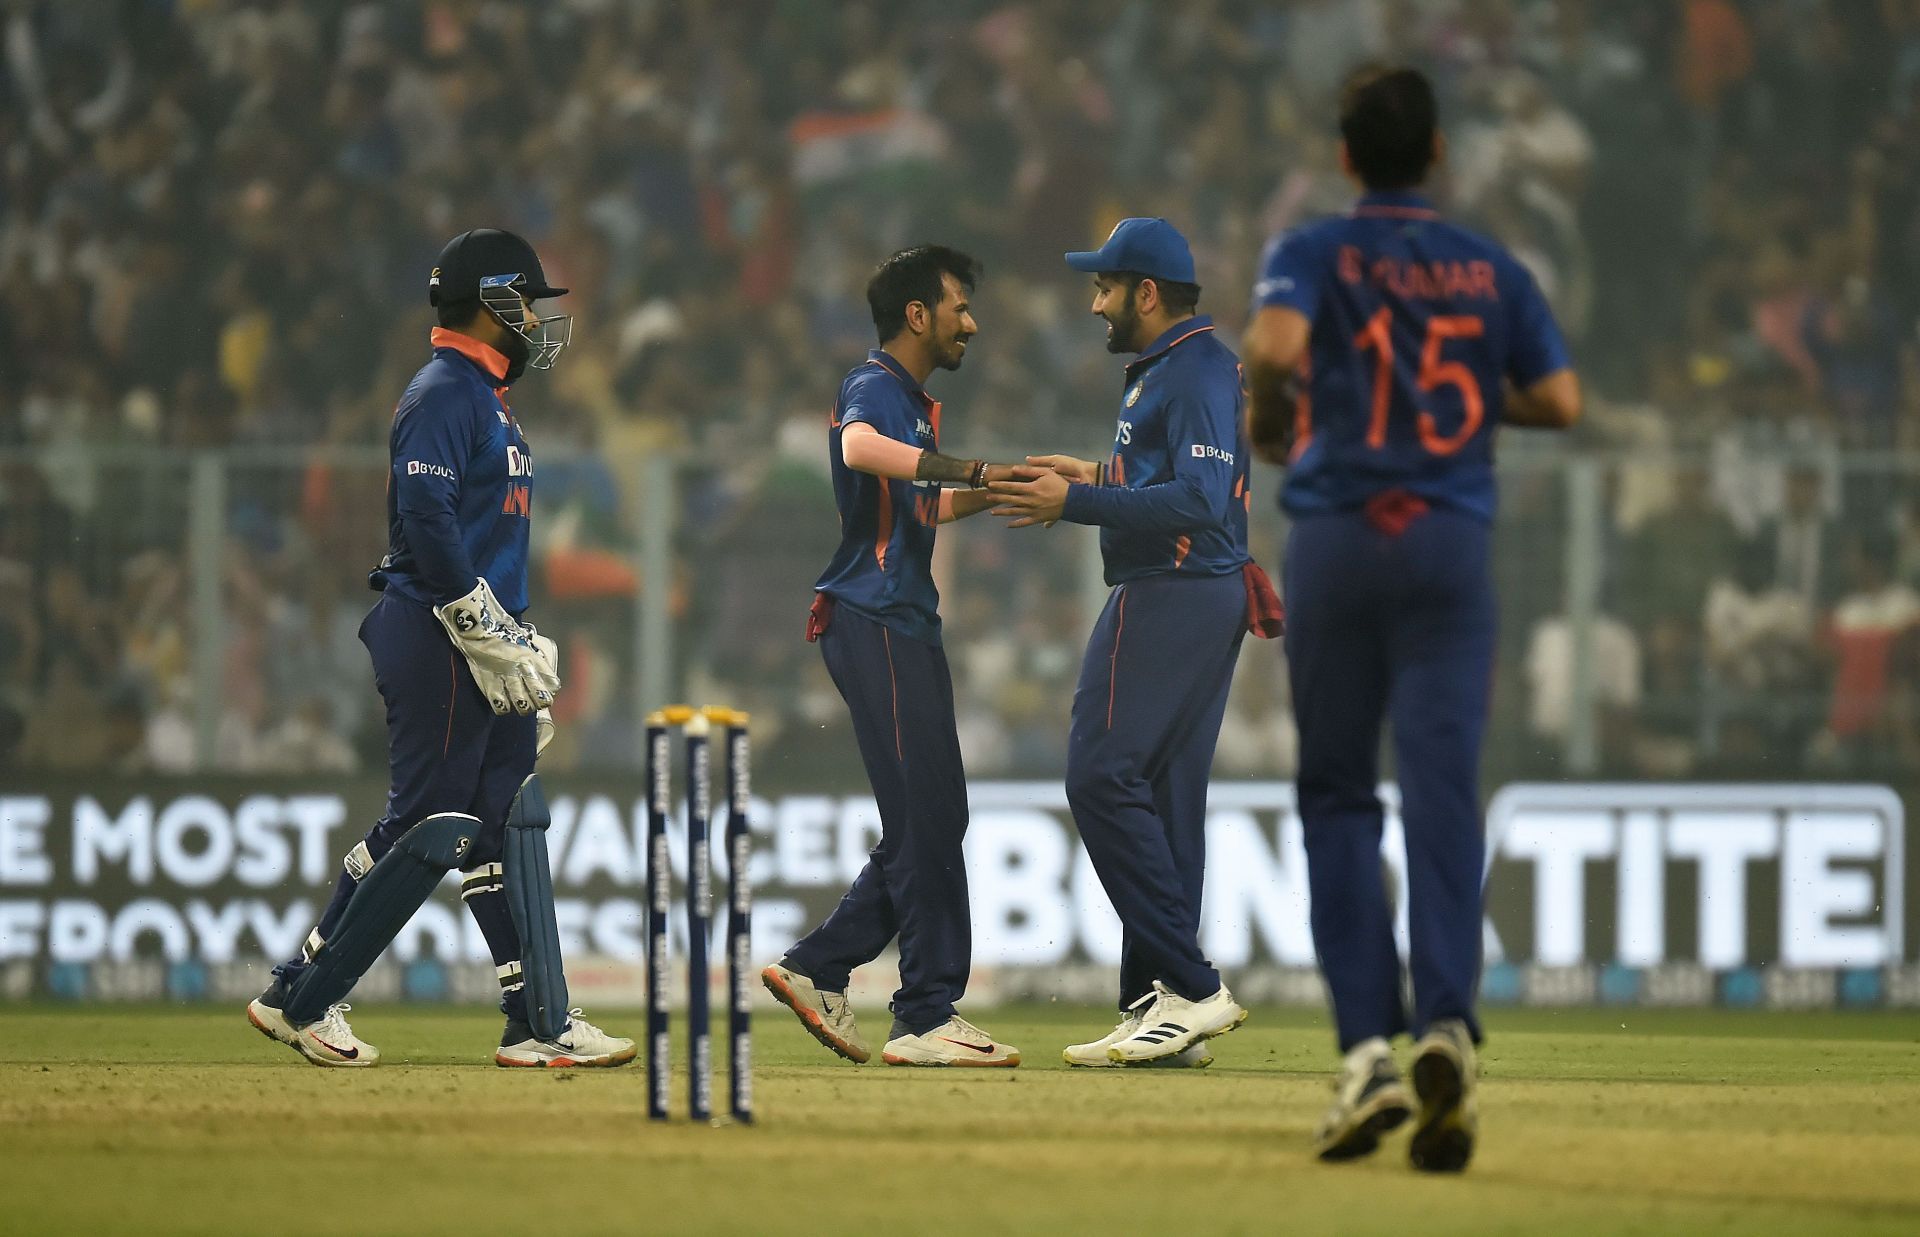 Yuzvendra Chahal conceded 34 runs in his four-over spell